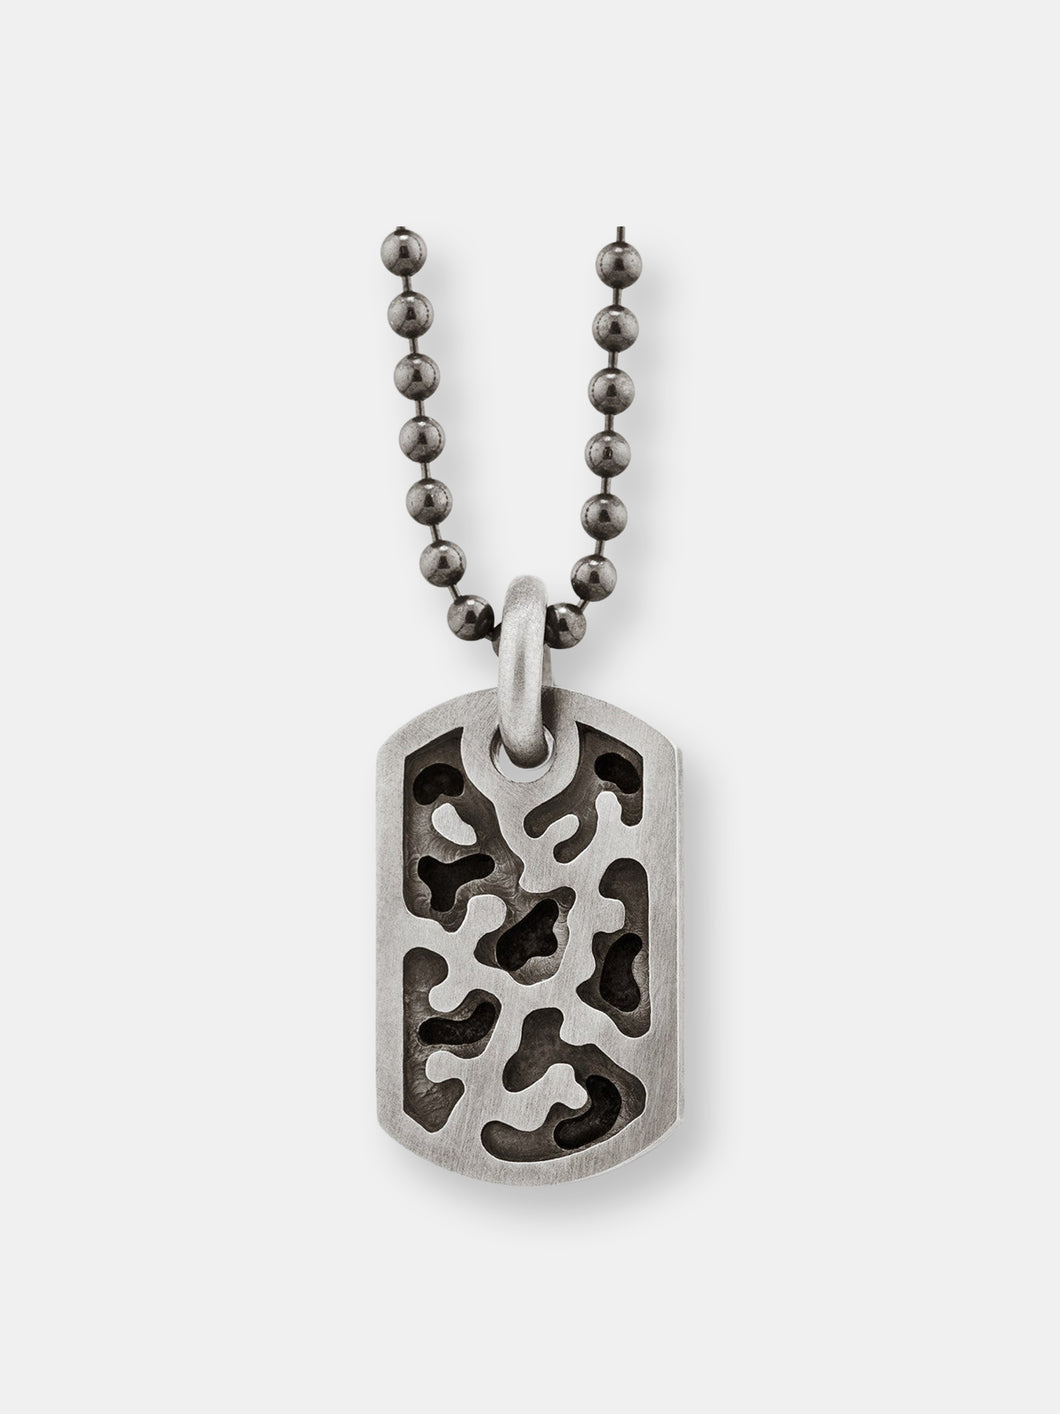 Small Camouflage Dog Tag